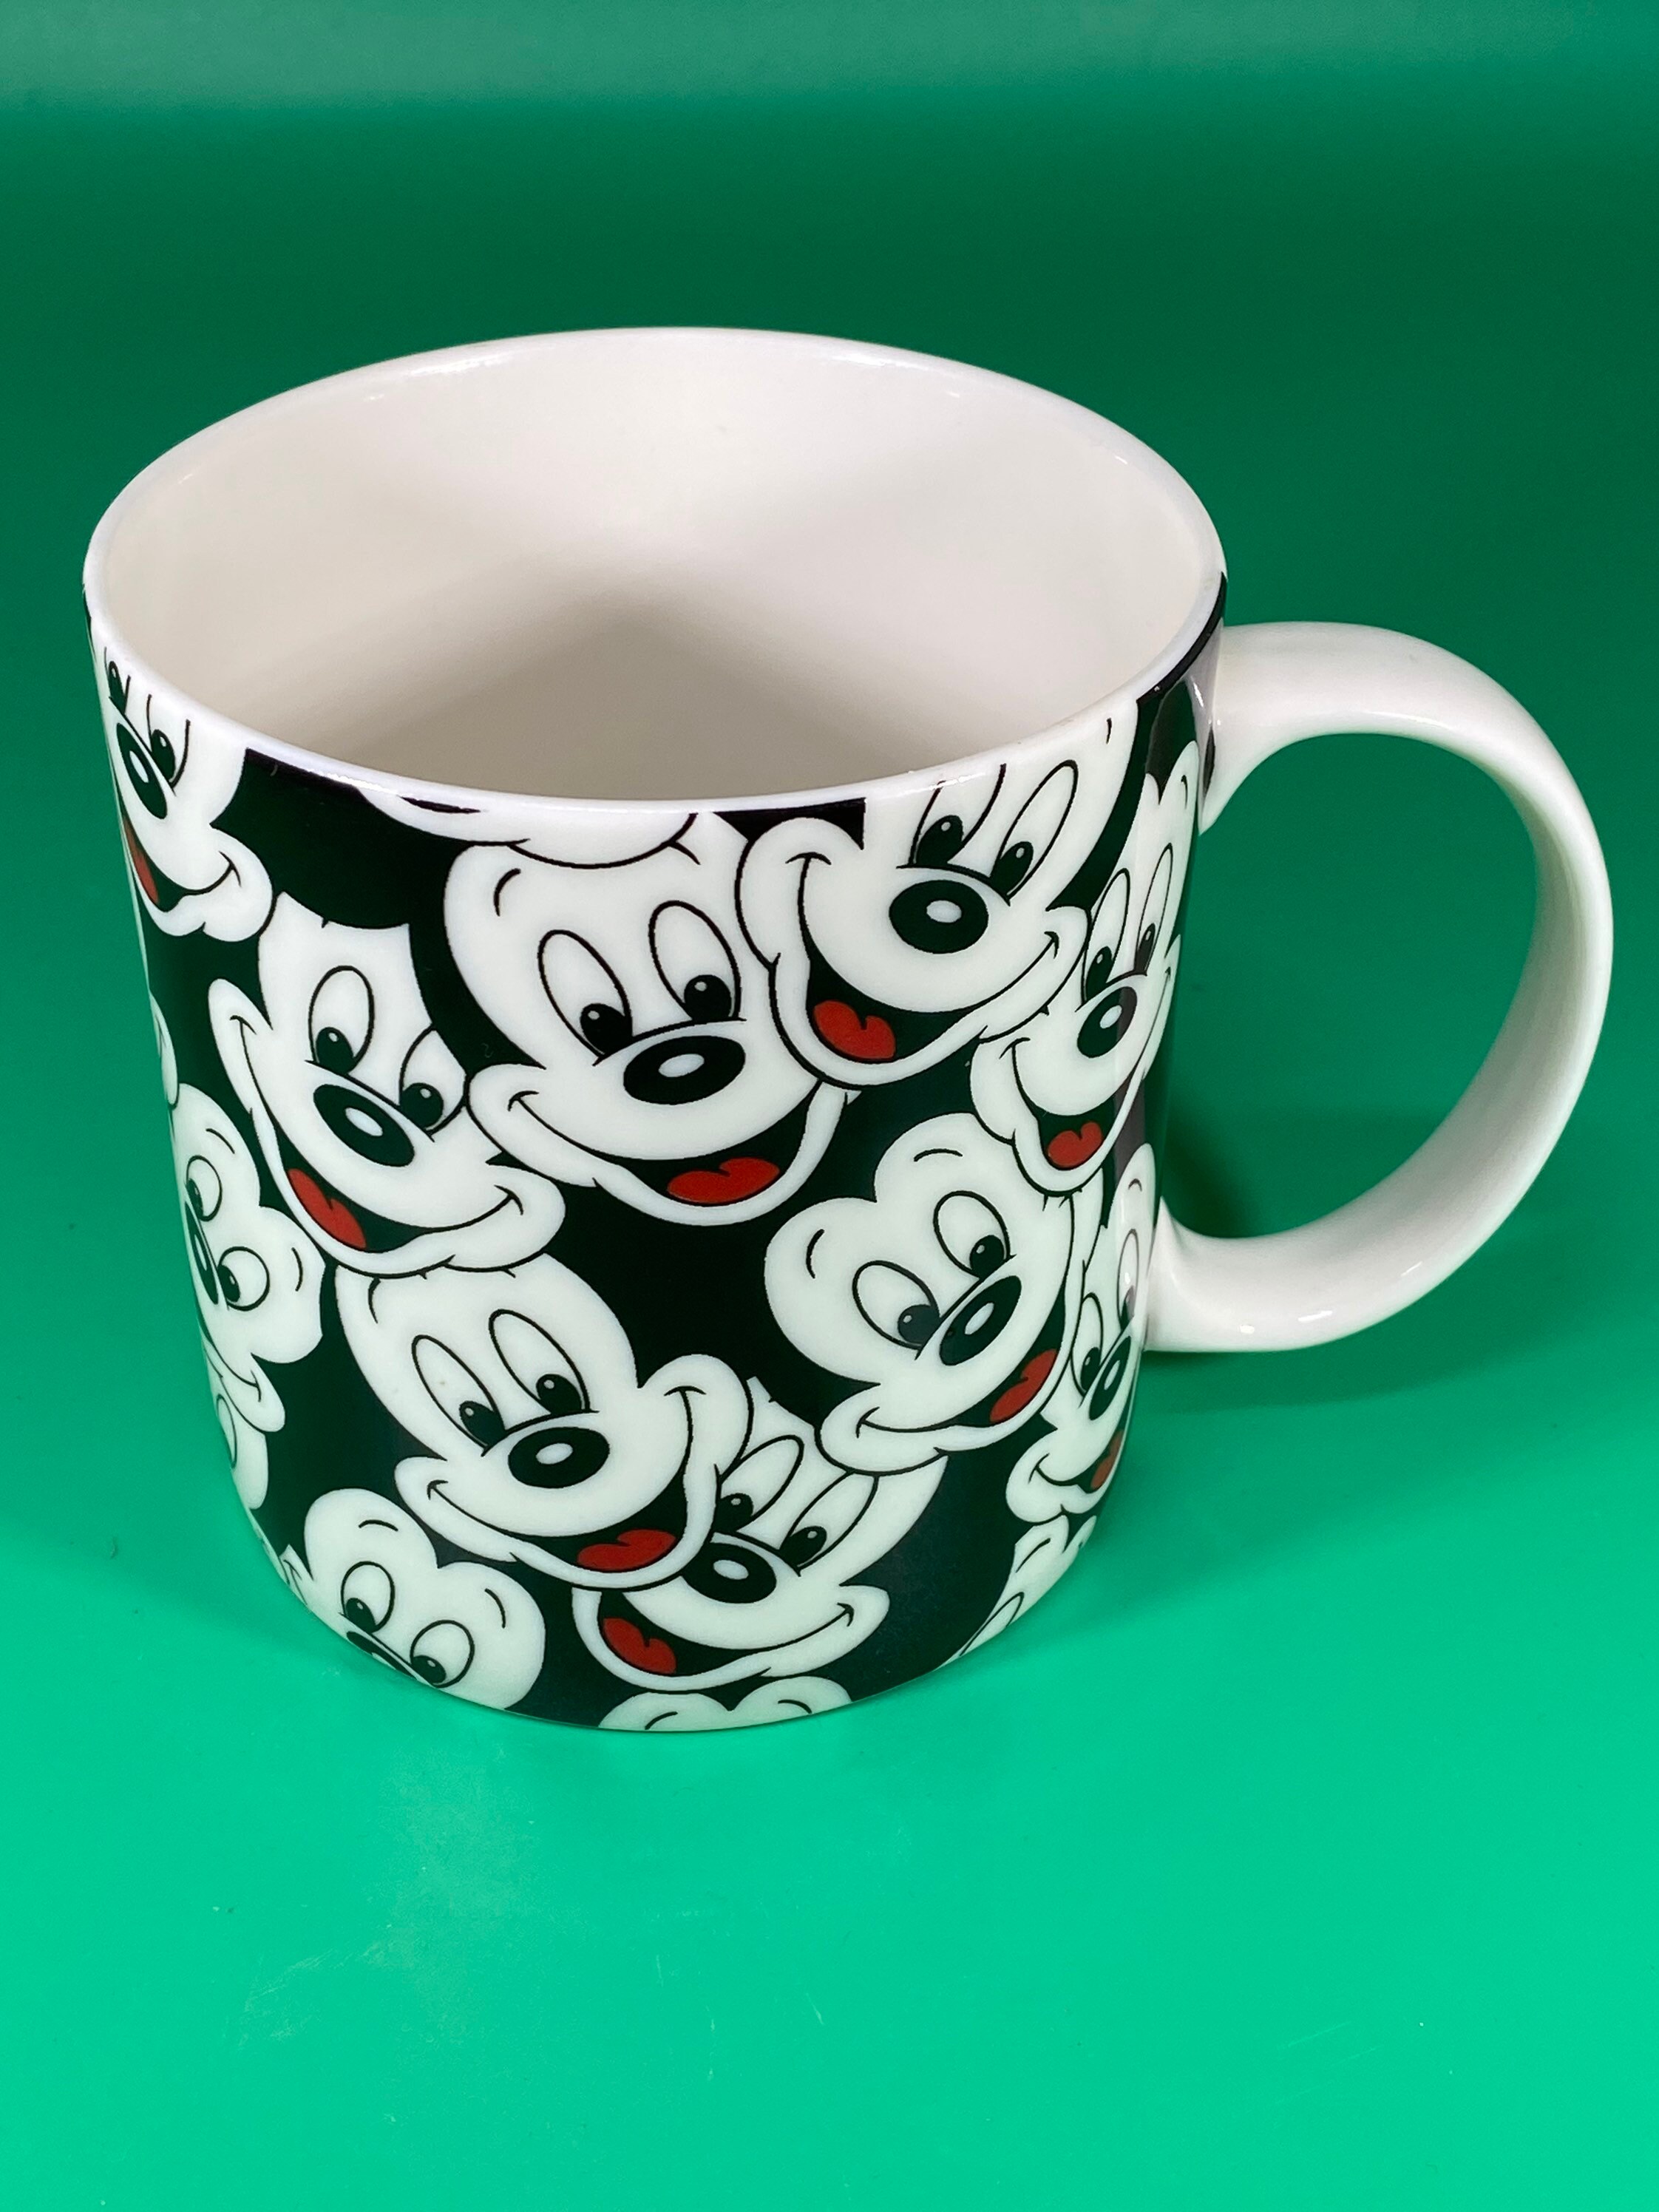 Vintage Mickey Mouse mornings Aren't Pretty Coffee Mug. Collectable Coffee  Mug Mickey Mouse Fan Gift 